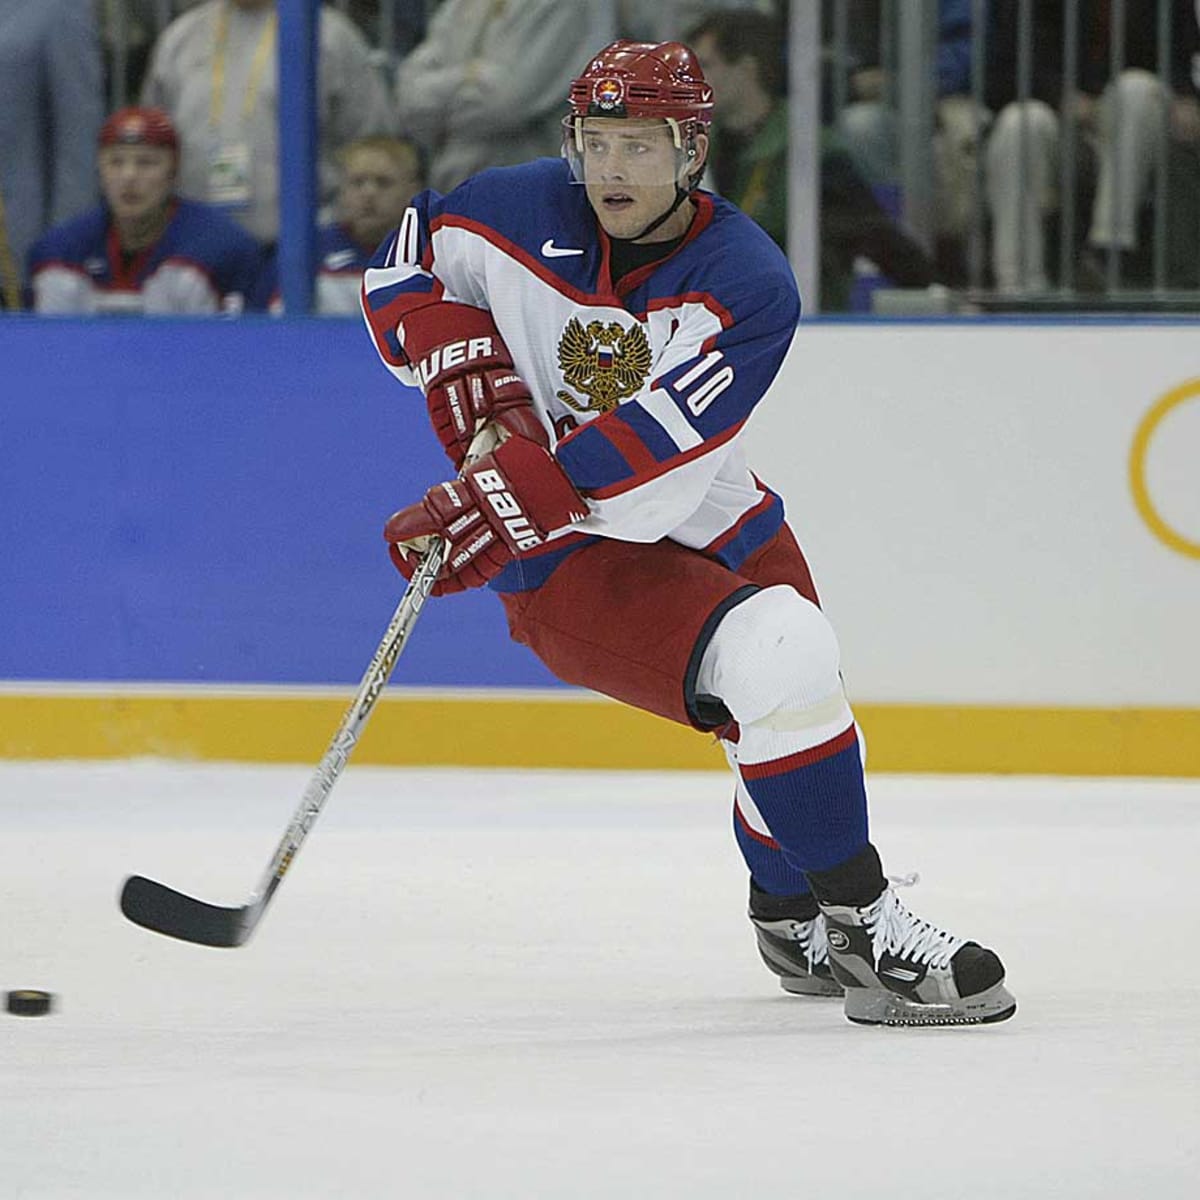 Russian professional hockey player Sergei Fedorov of the Detroit Red  News Photo - Getty Images